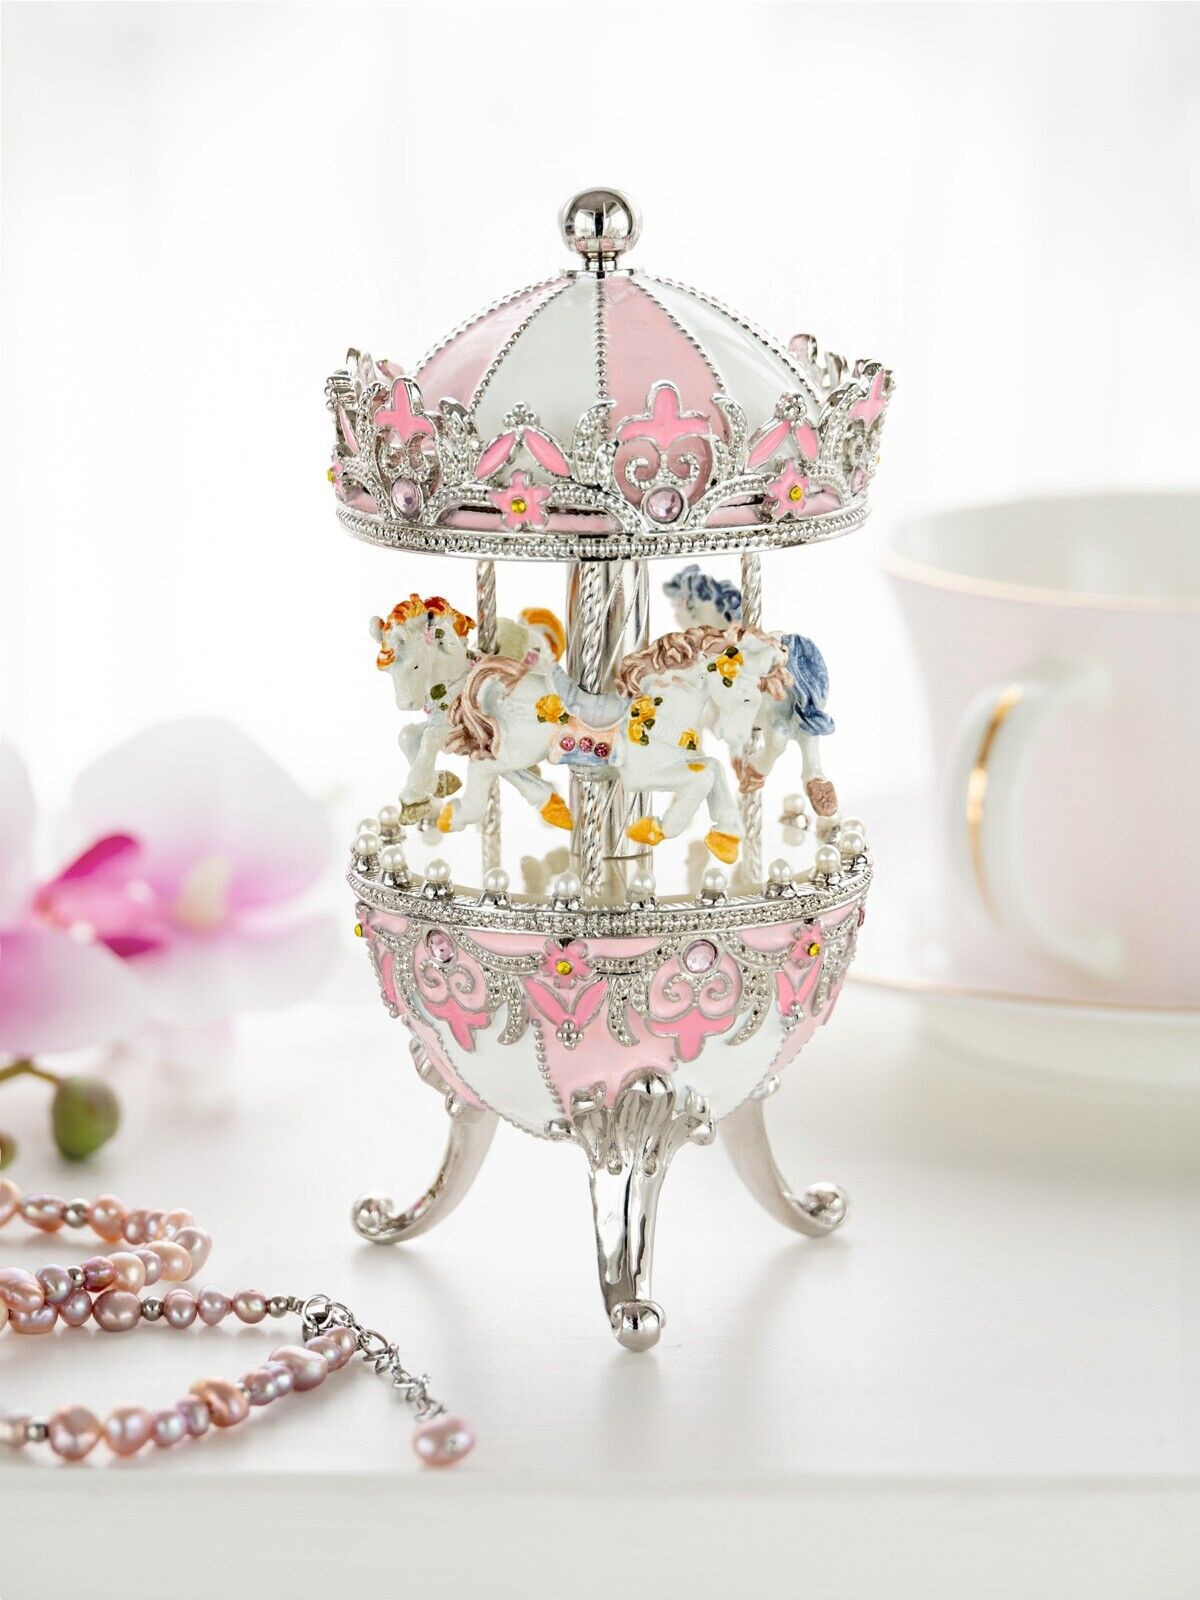 Keren Kopal Pink Wind up Horse Carousel Decorated with Austrian Crystals